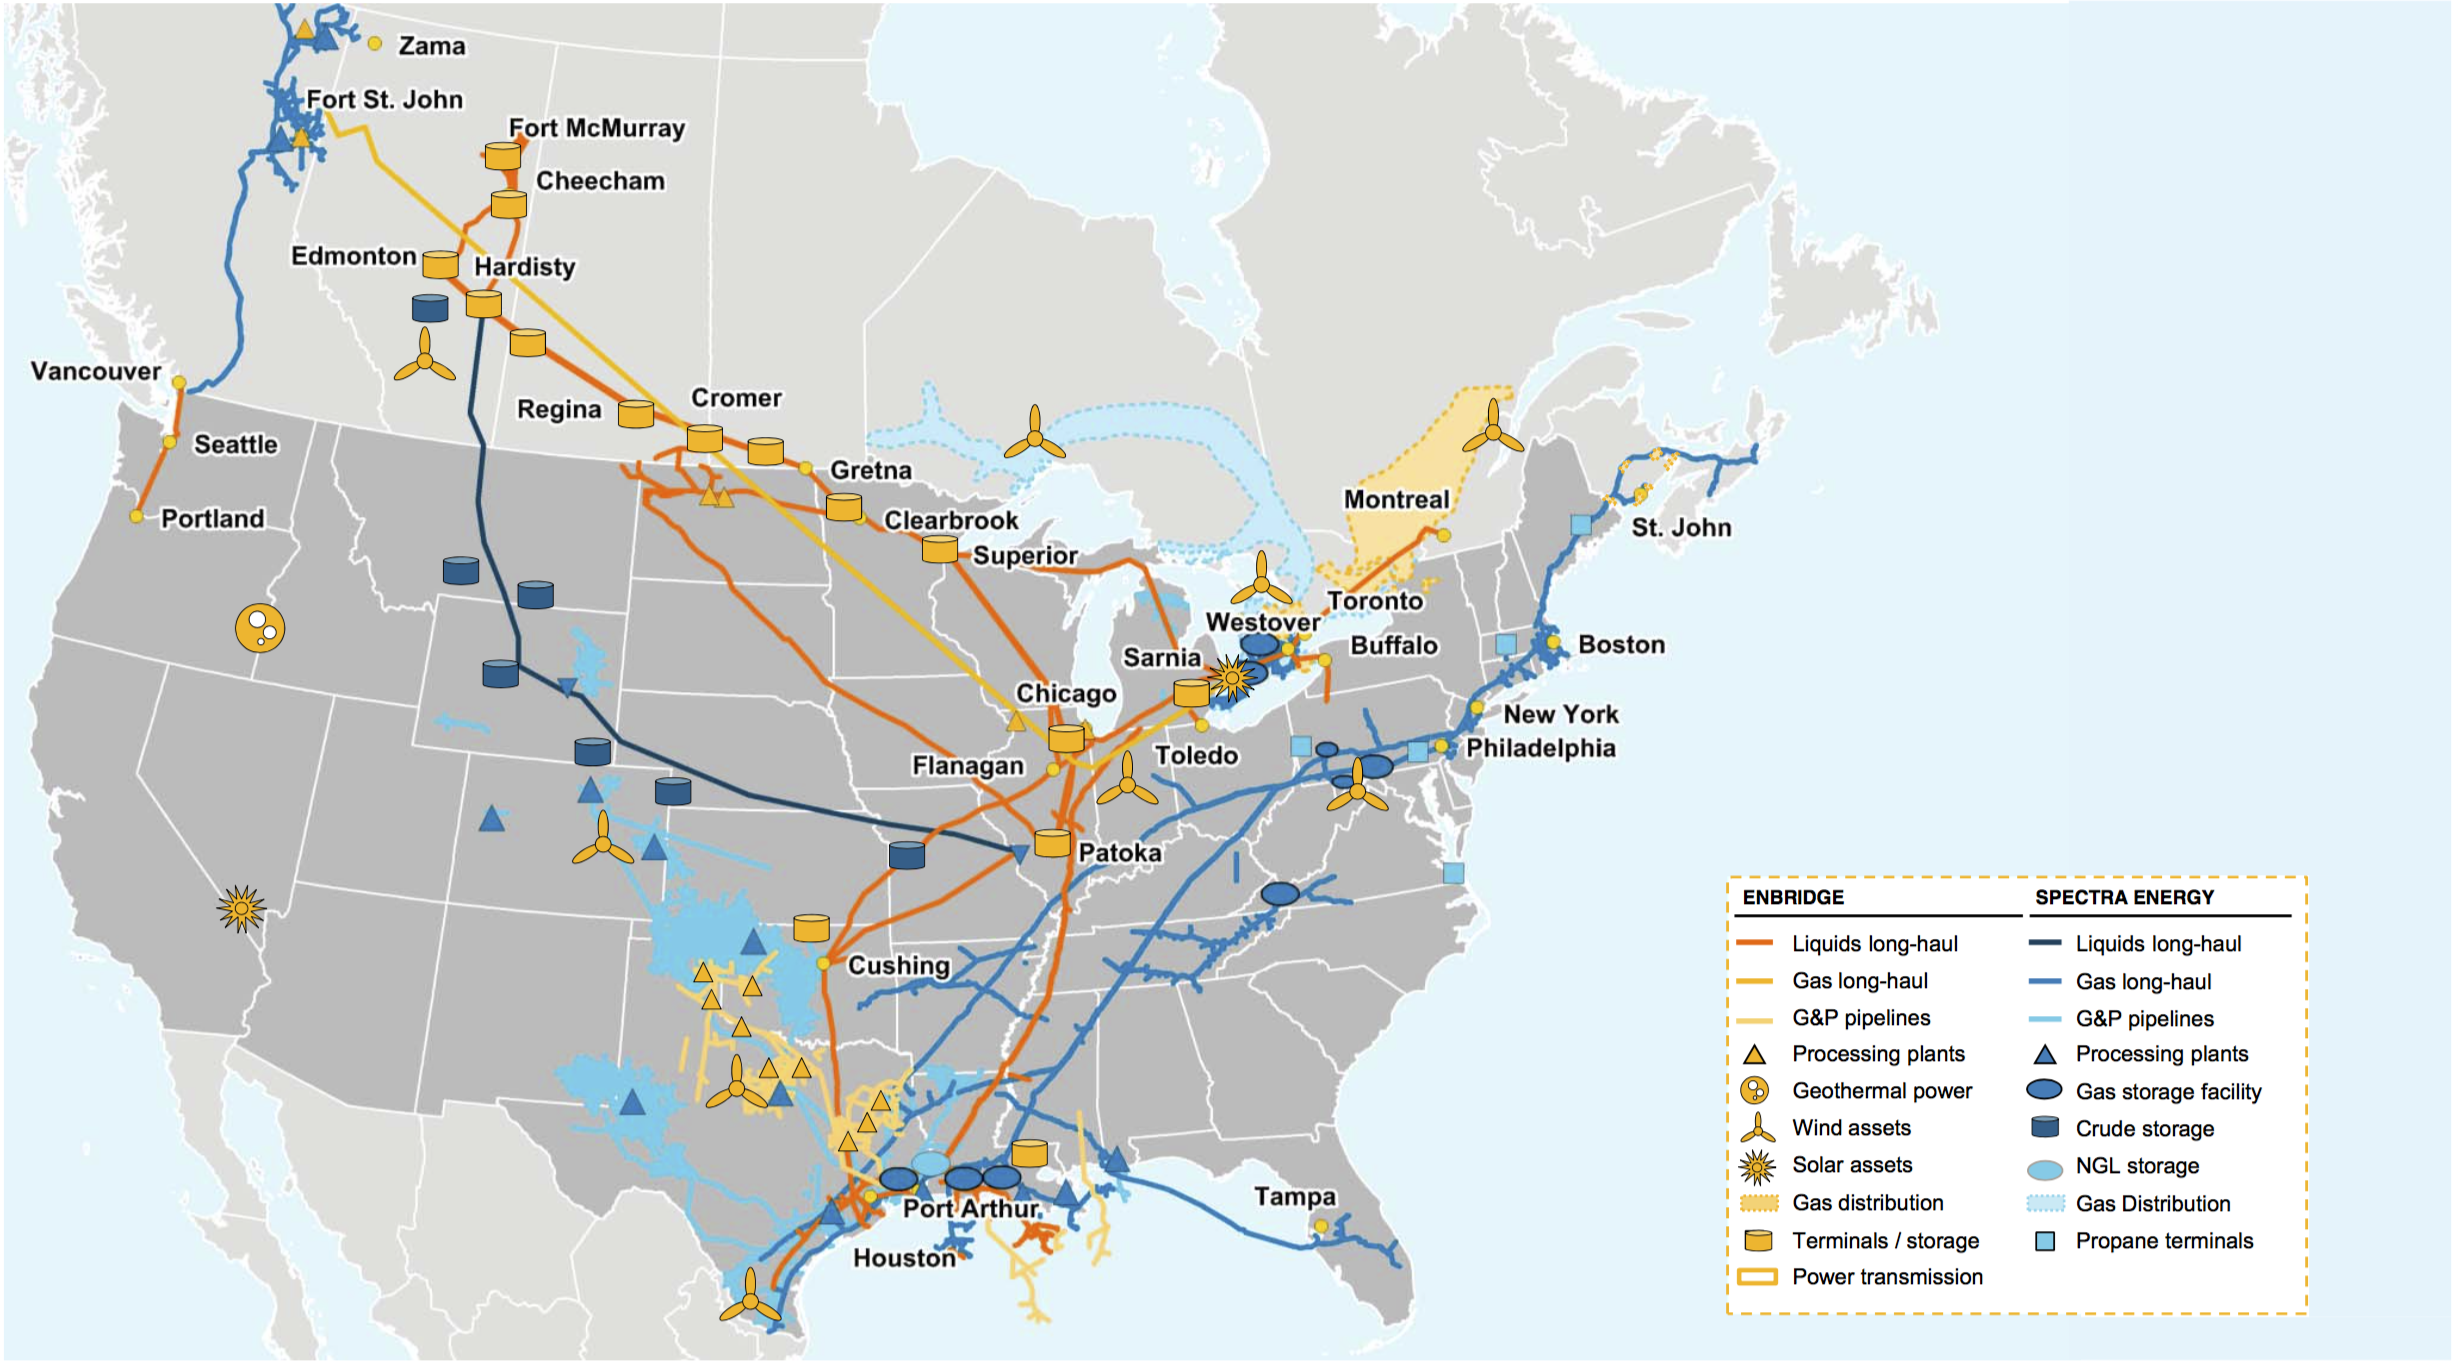 Enbridge and Spectra Energy join forces to create 165 billion pipeline